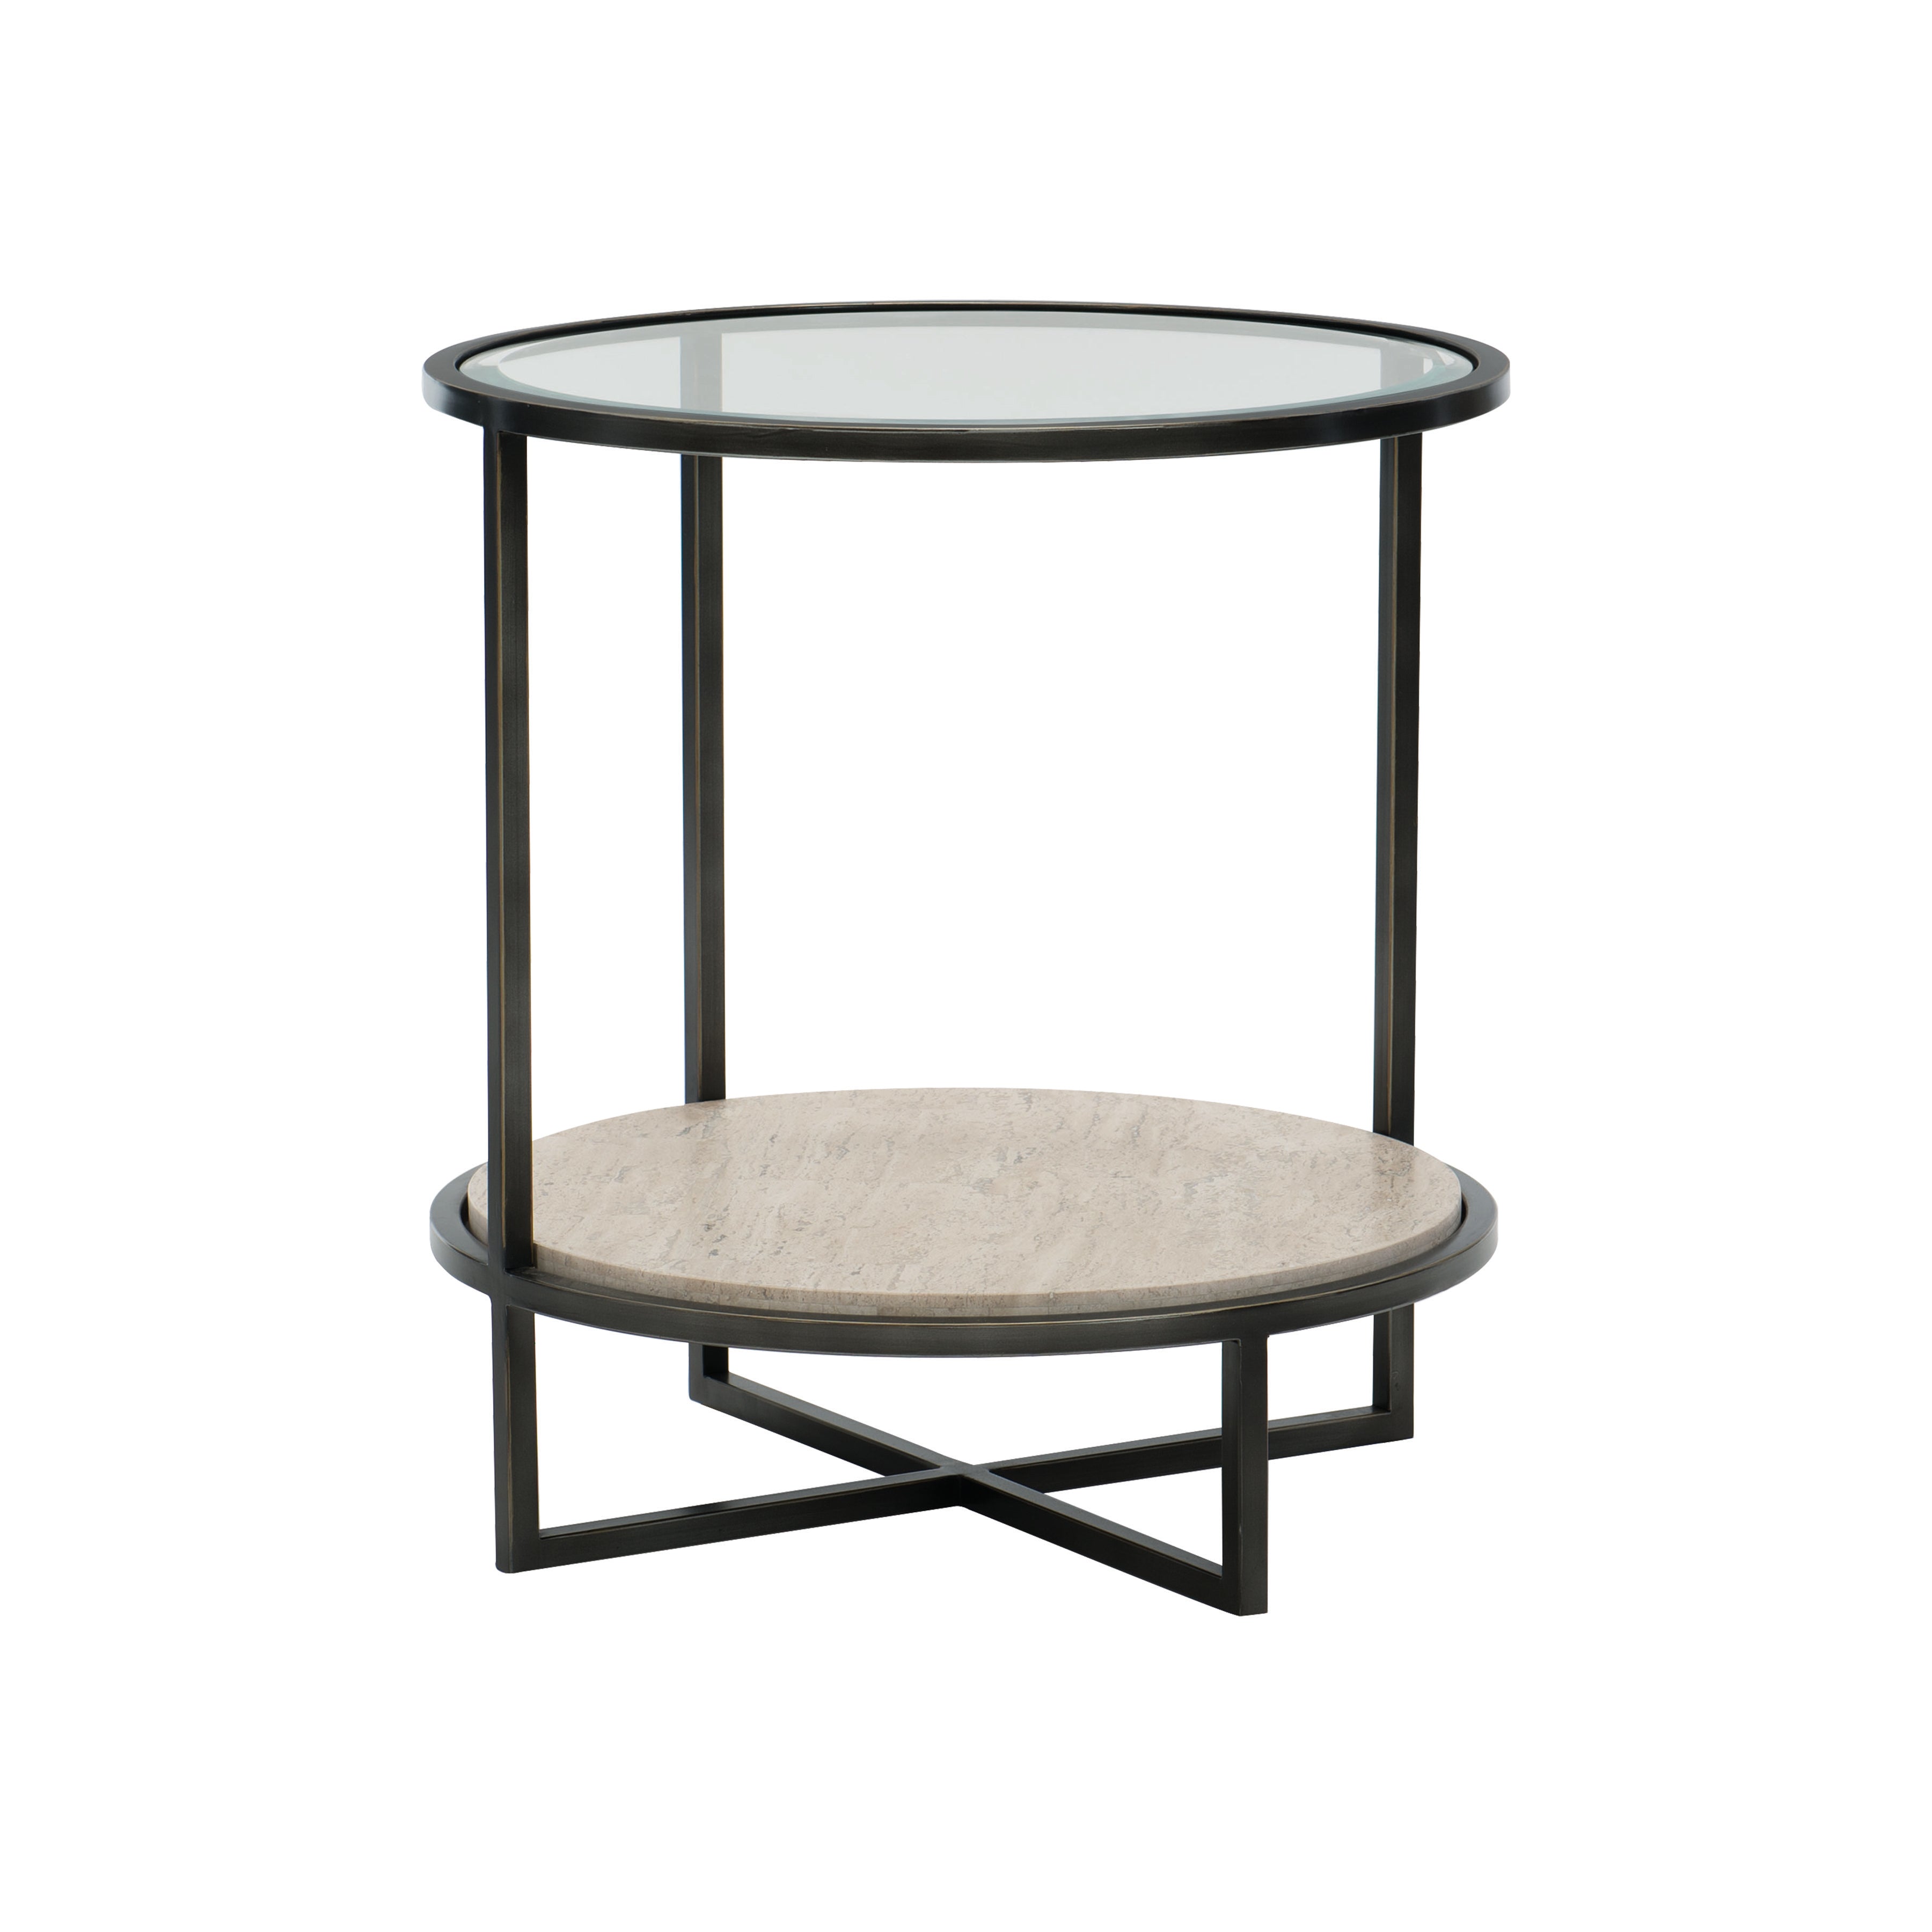 Harlow Metal Round Chairside Table